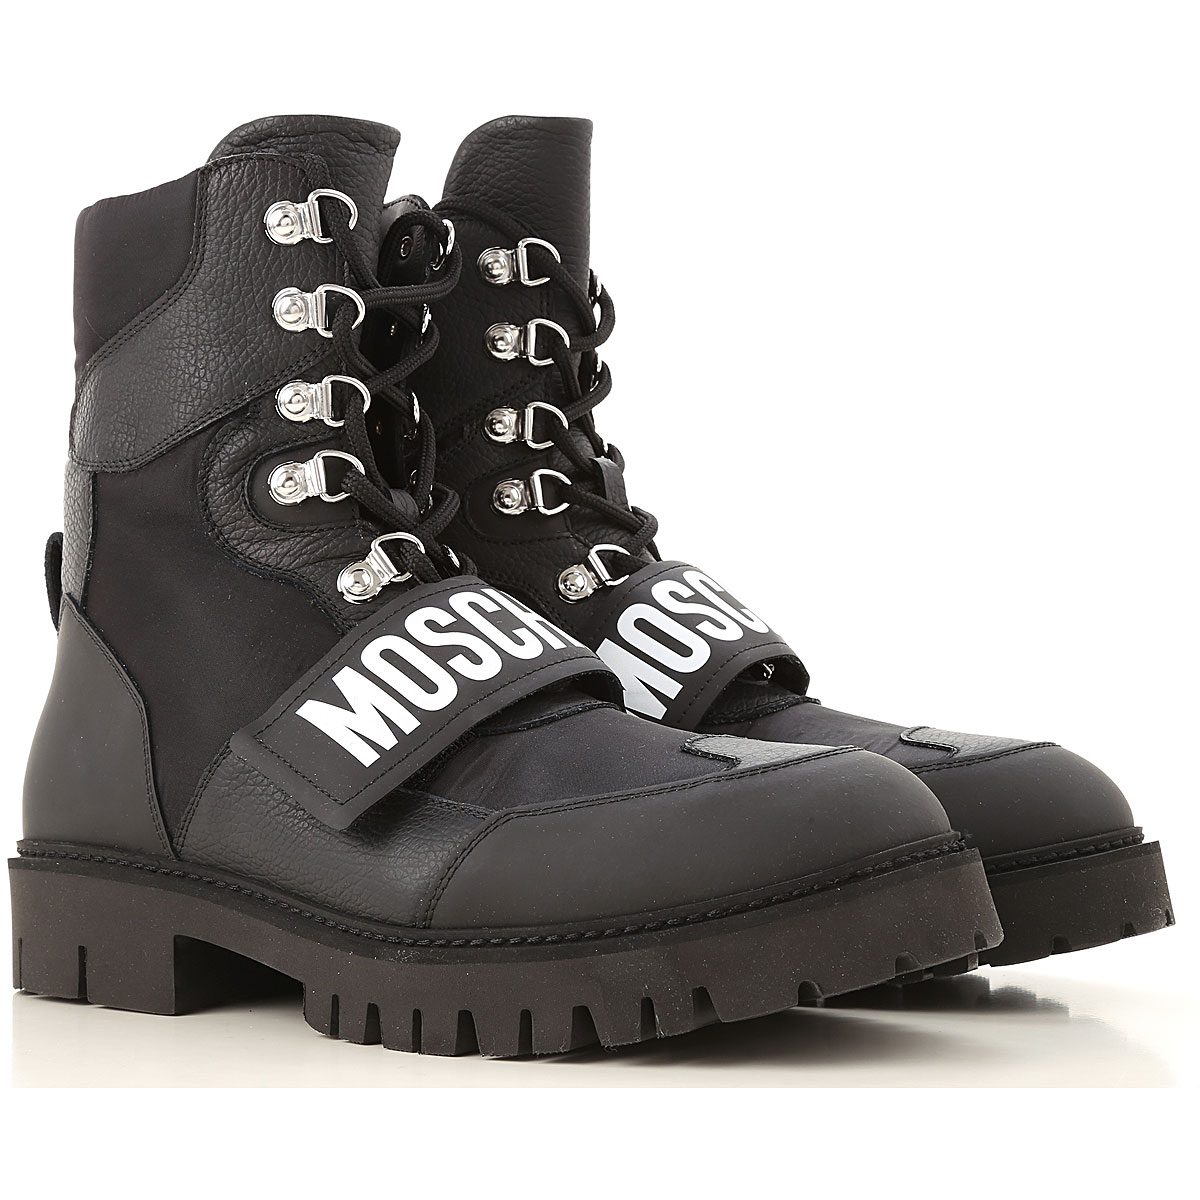 Mens Shoes Moschino, Style code 